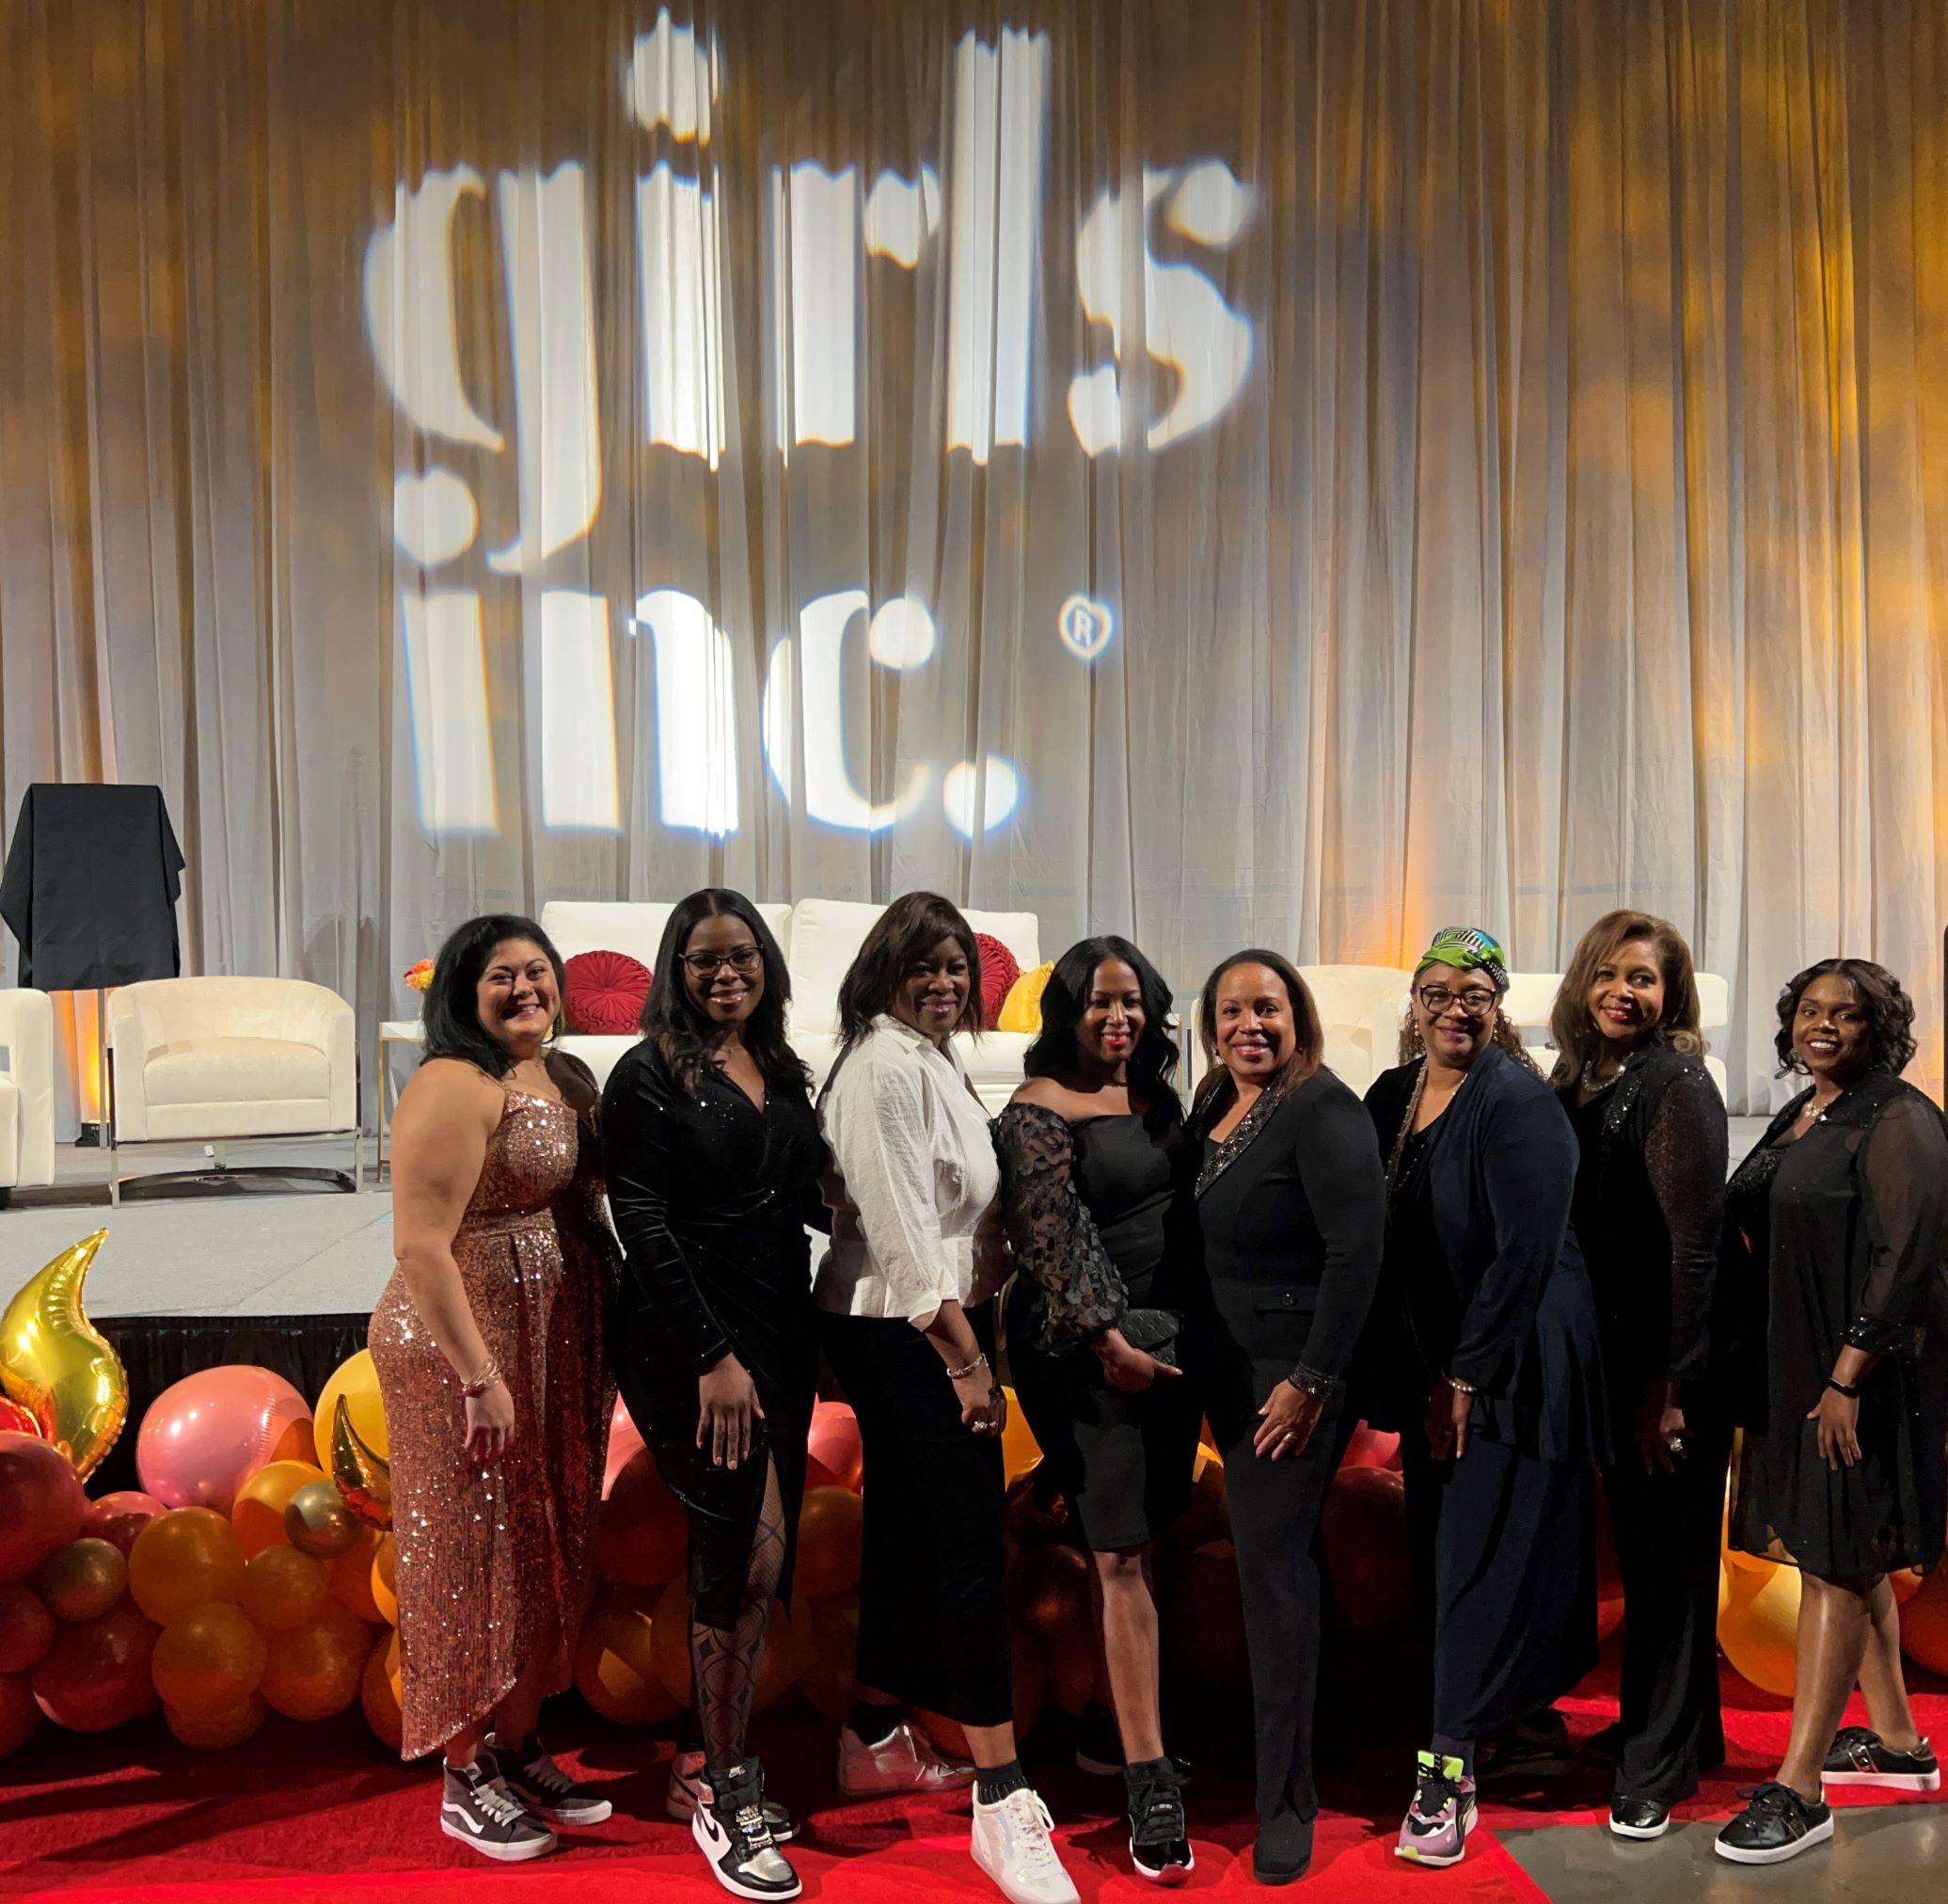 A group photo of eight woman, including Kimberly, standing in a group of women in front of a projection of the words, “Girls Inc.”